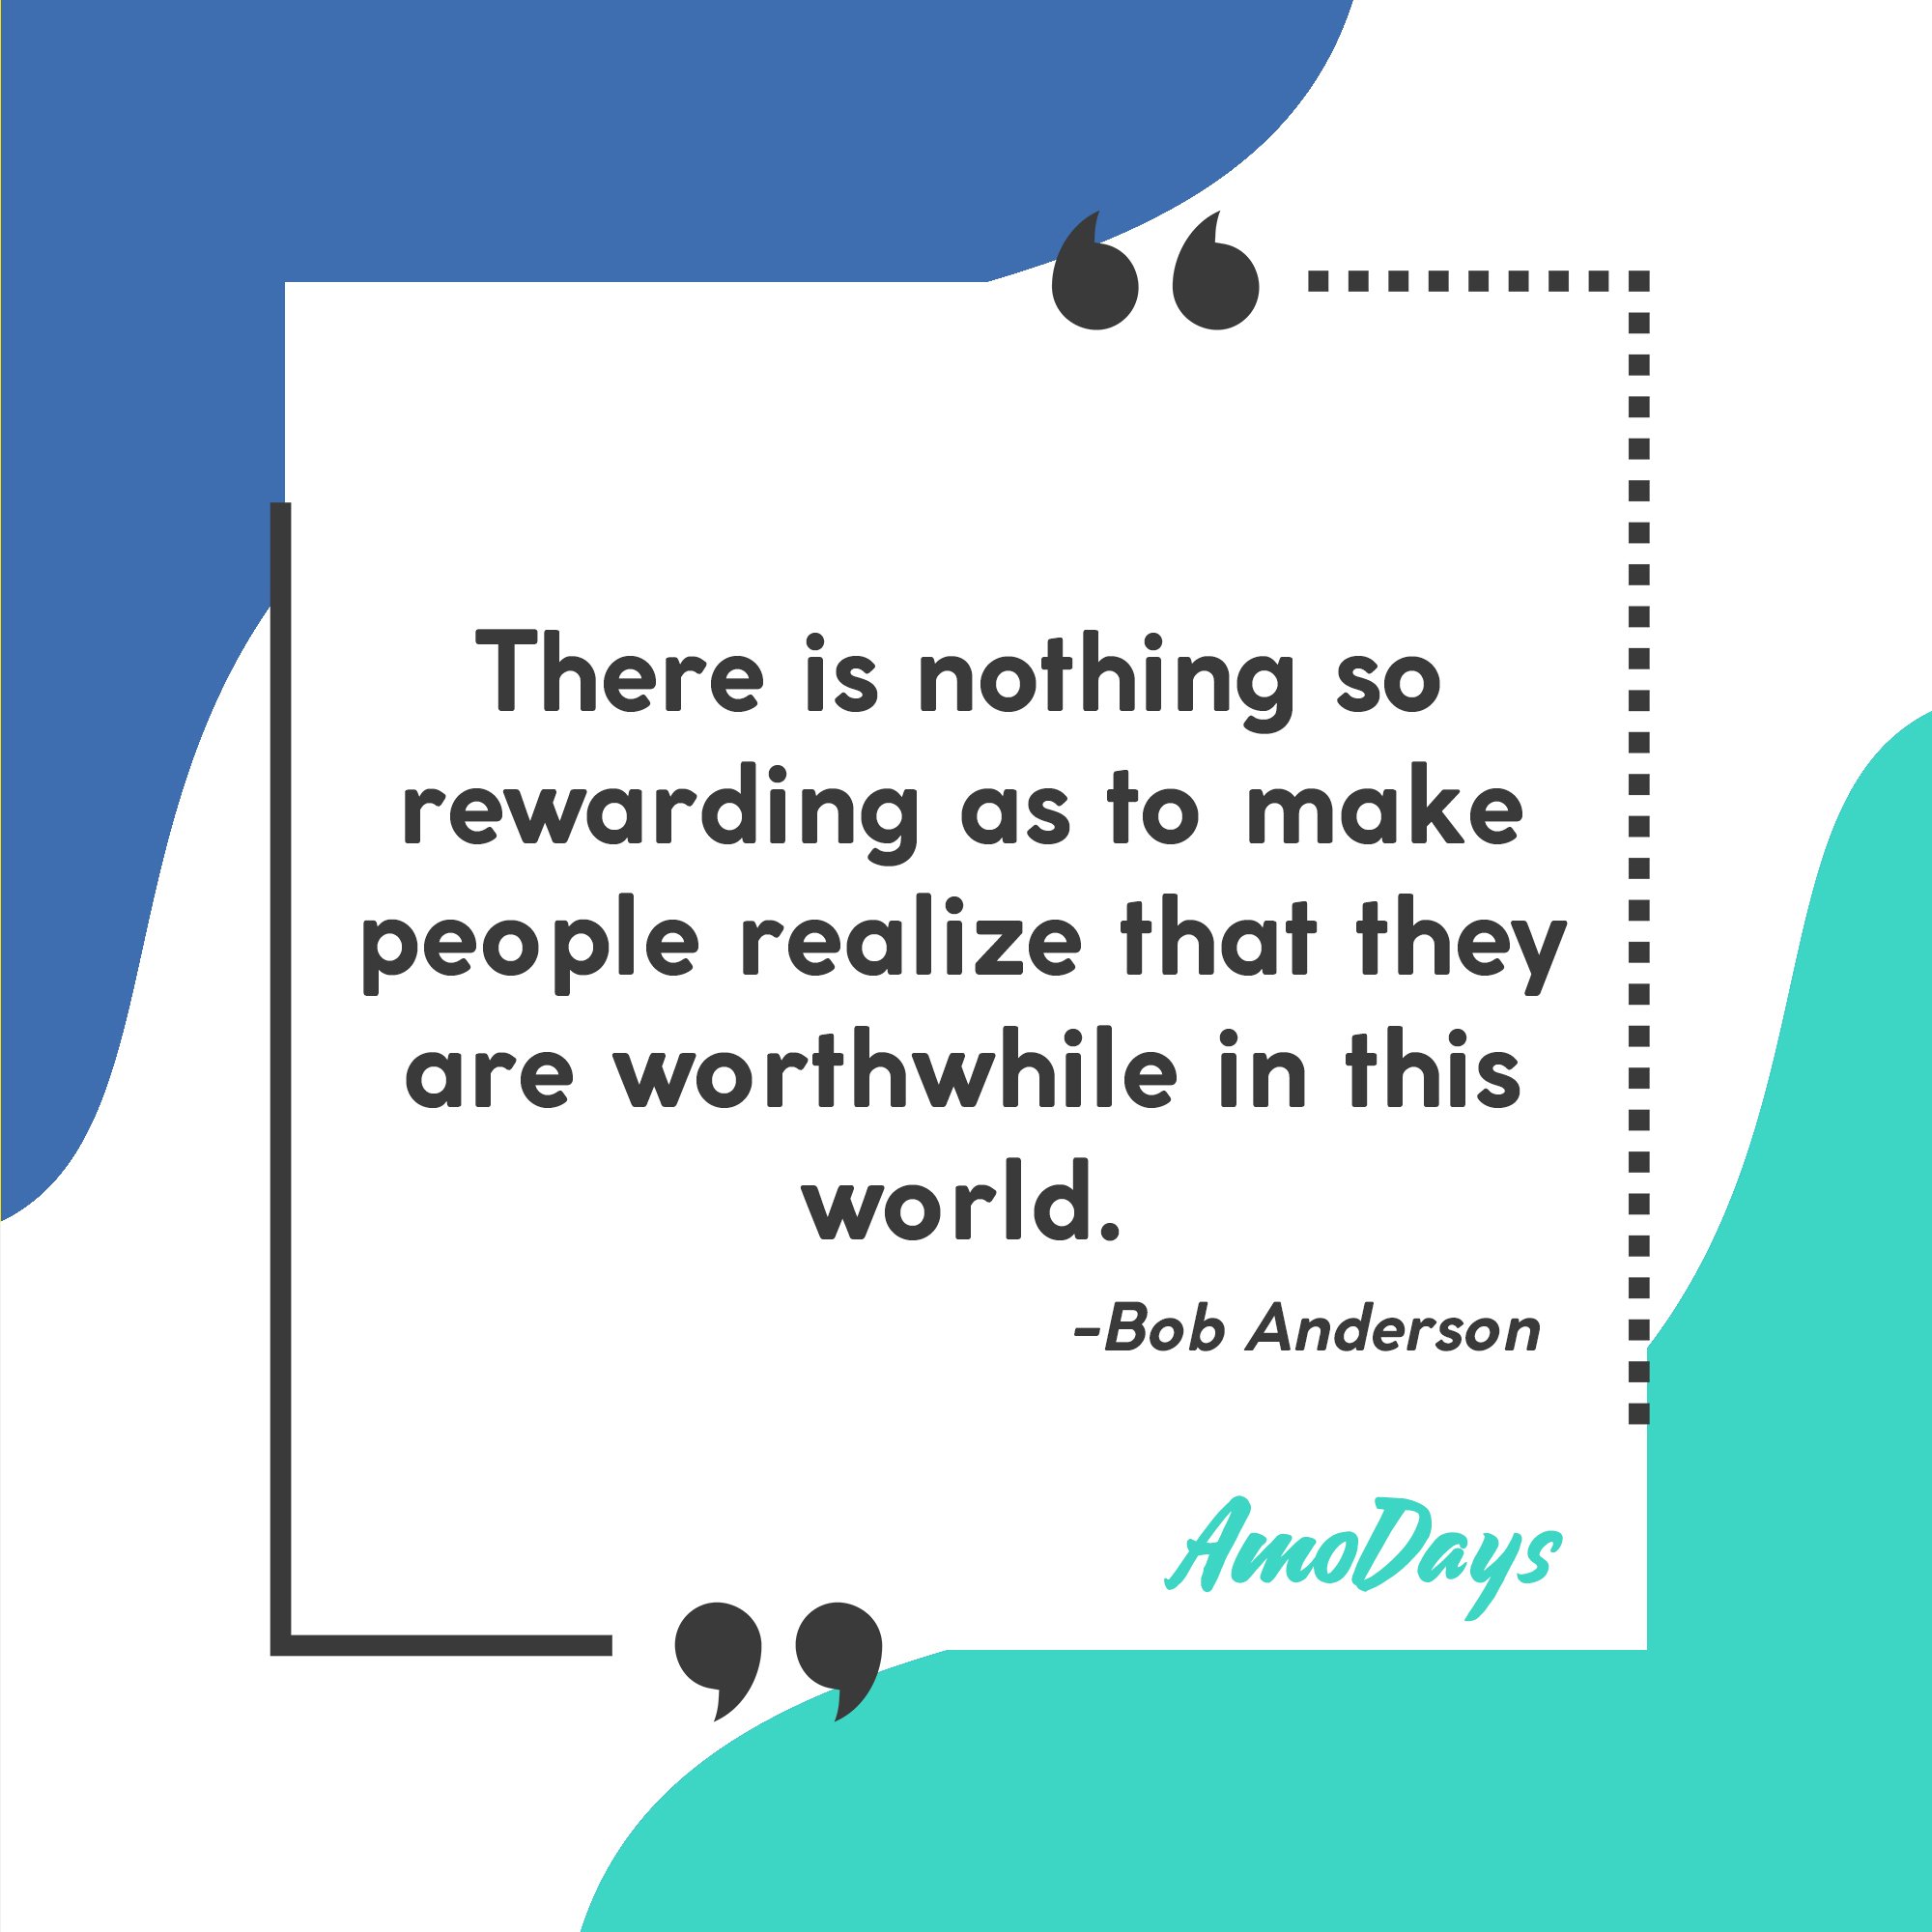 Bob Anderson's quote “There is nothing so rewarding as to make people realize that they are worthwhile in this world.” Image: AmoDays